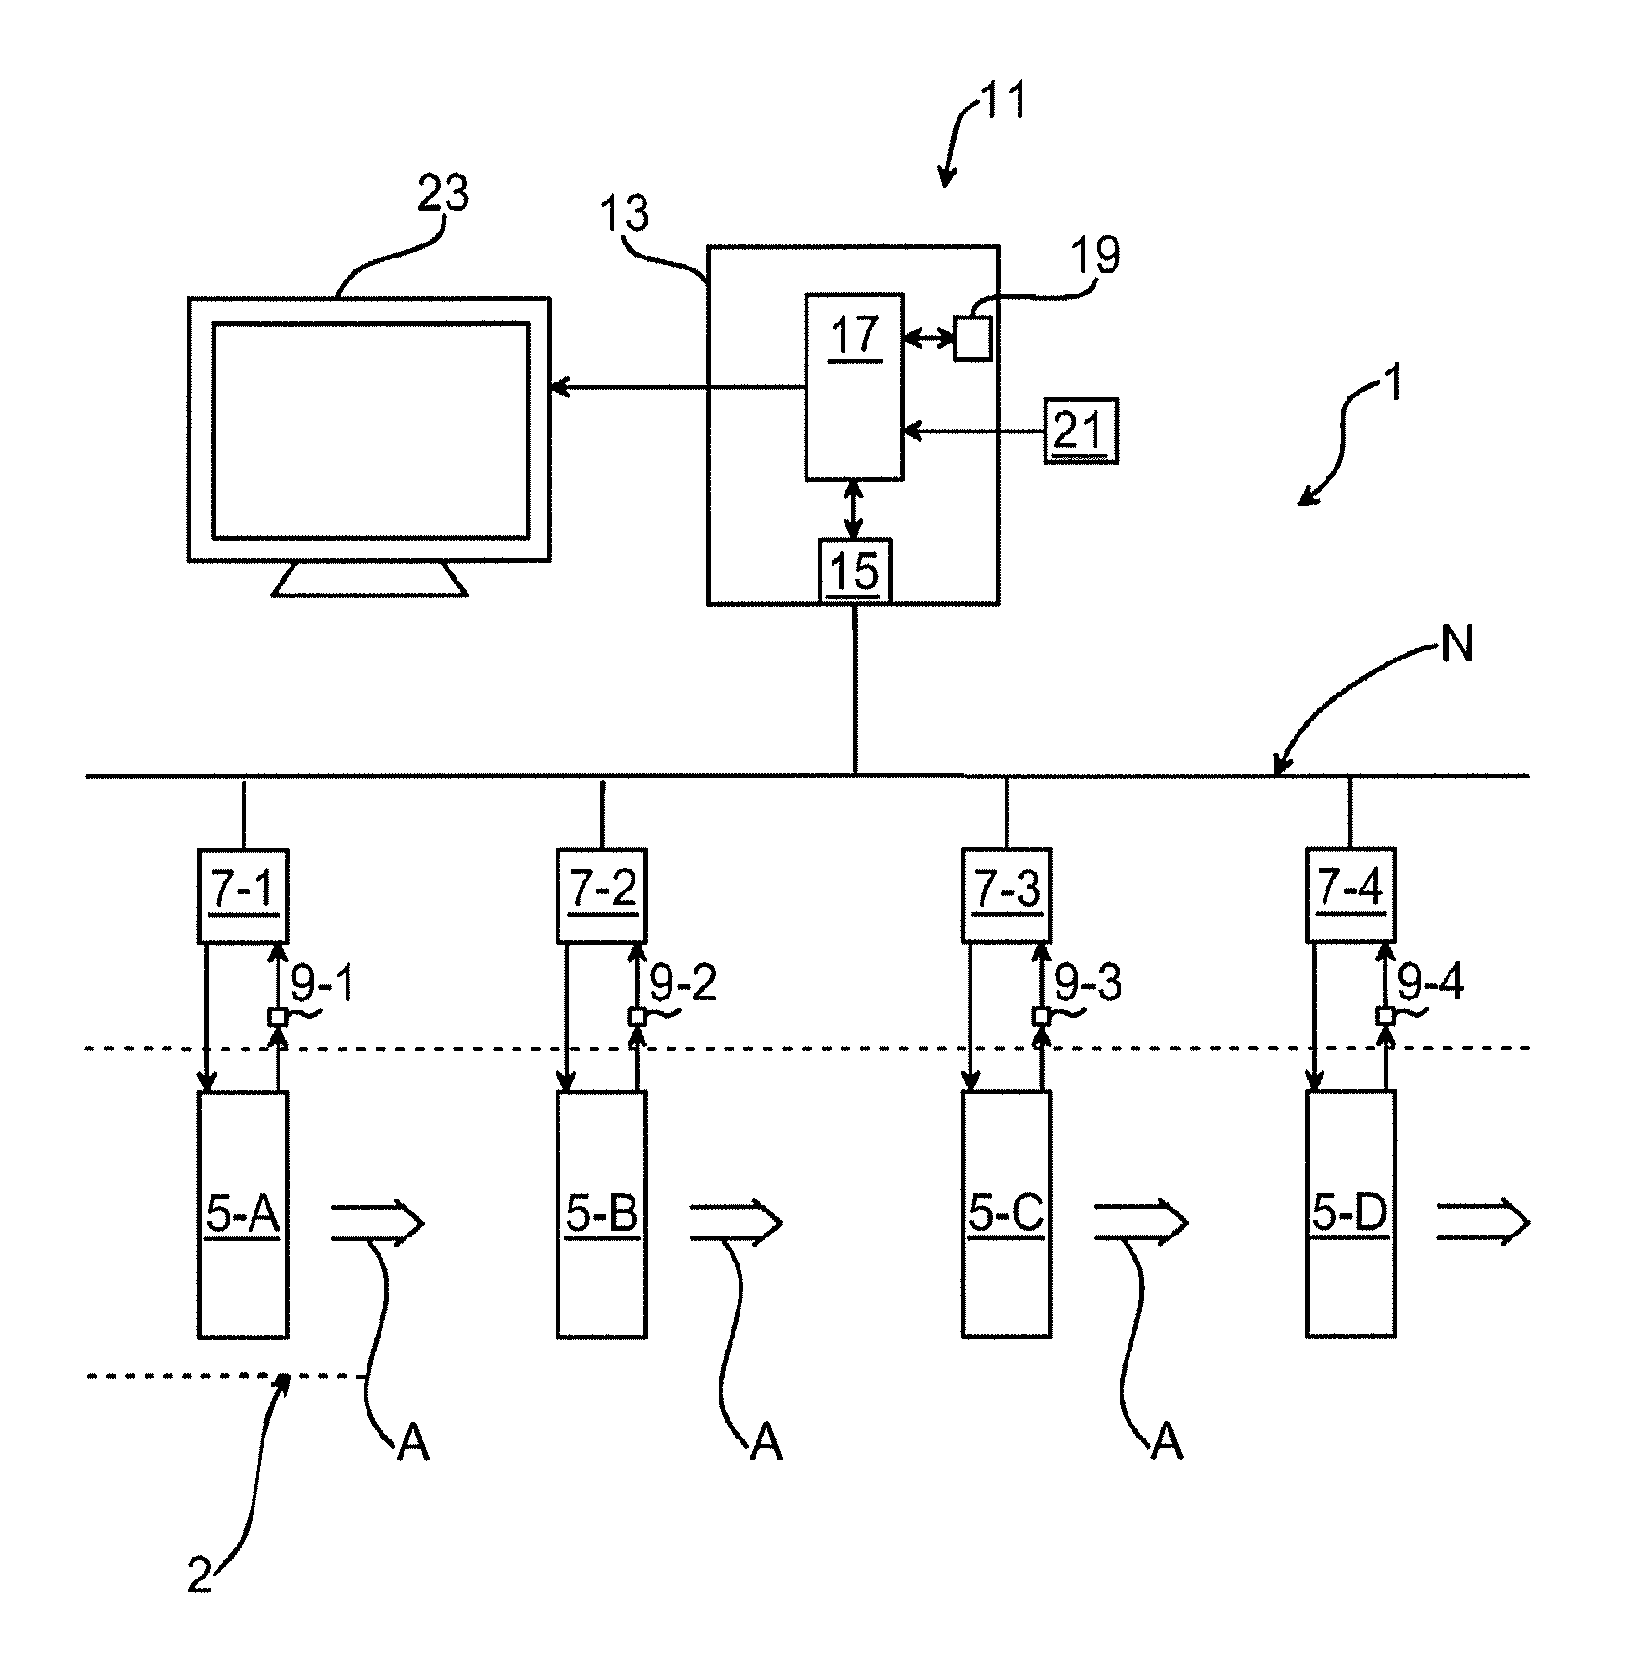 Method and system for controlling an industrial process